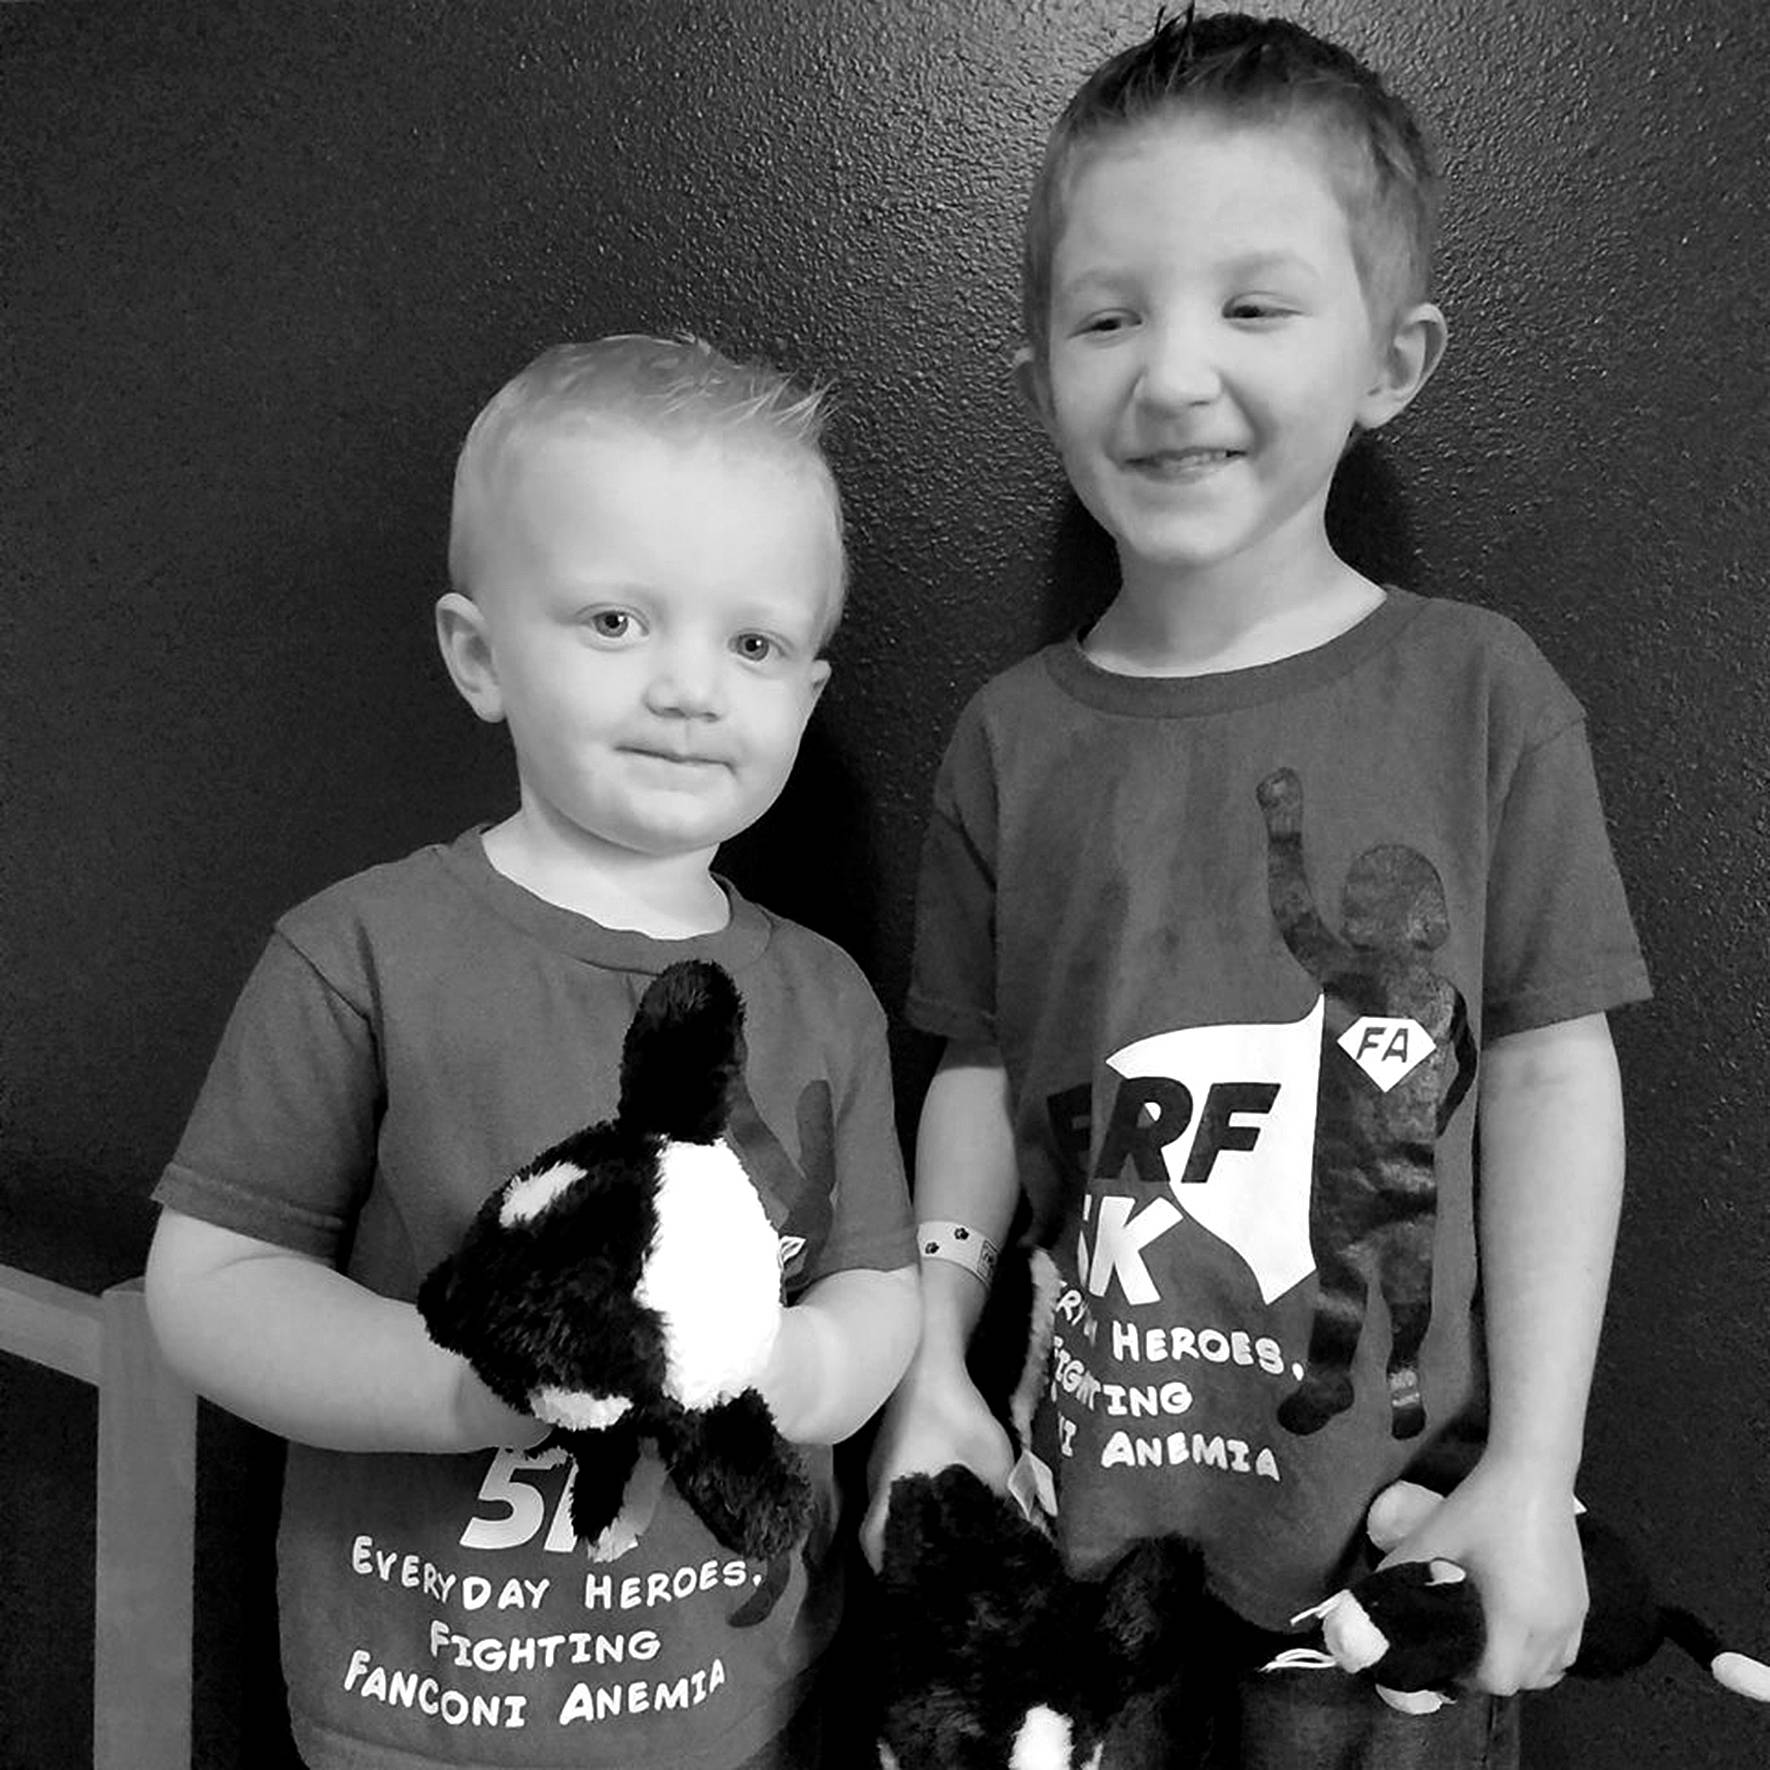 Blake Robinson, 5, and his older brother Bryce Robinson wearing their new FARF 5K shirts. Both boys are from Maple Valley and Blake suffers from FA. Photo courtesy of FARF 5K.